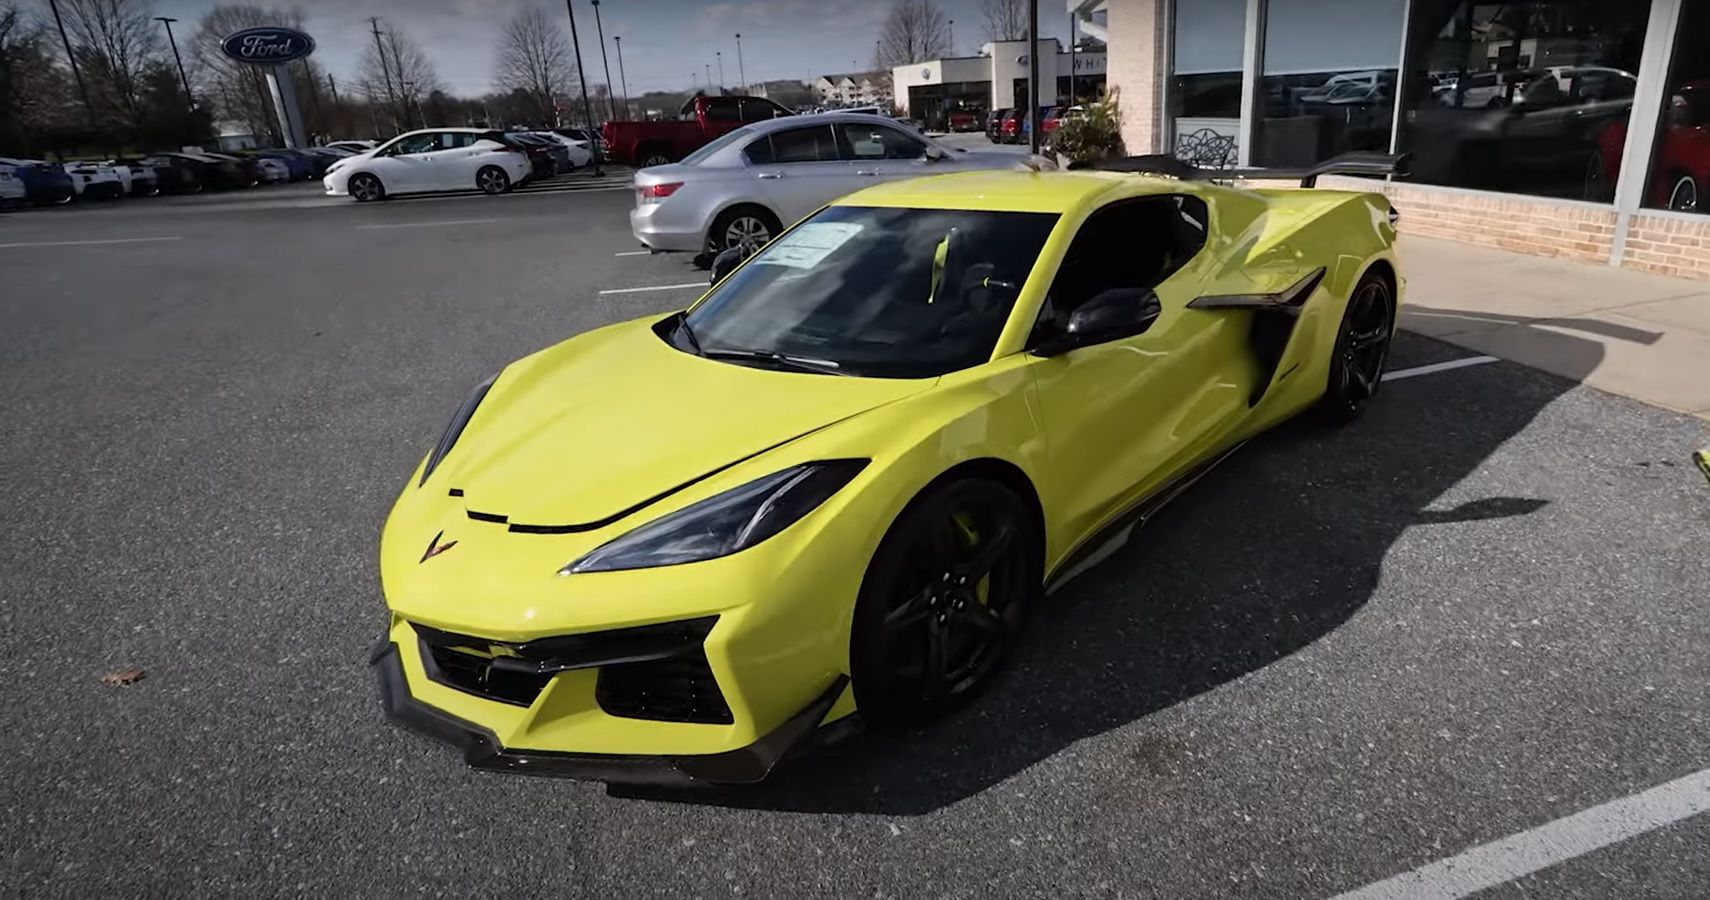 TheStradman Takes Delivery of a brand new Chevrolet Corvette C8 Z06